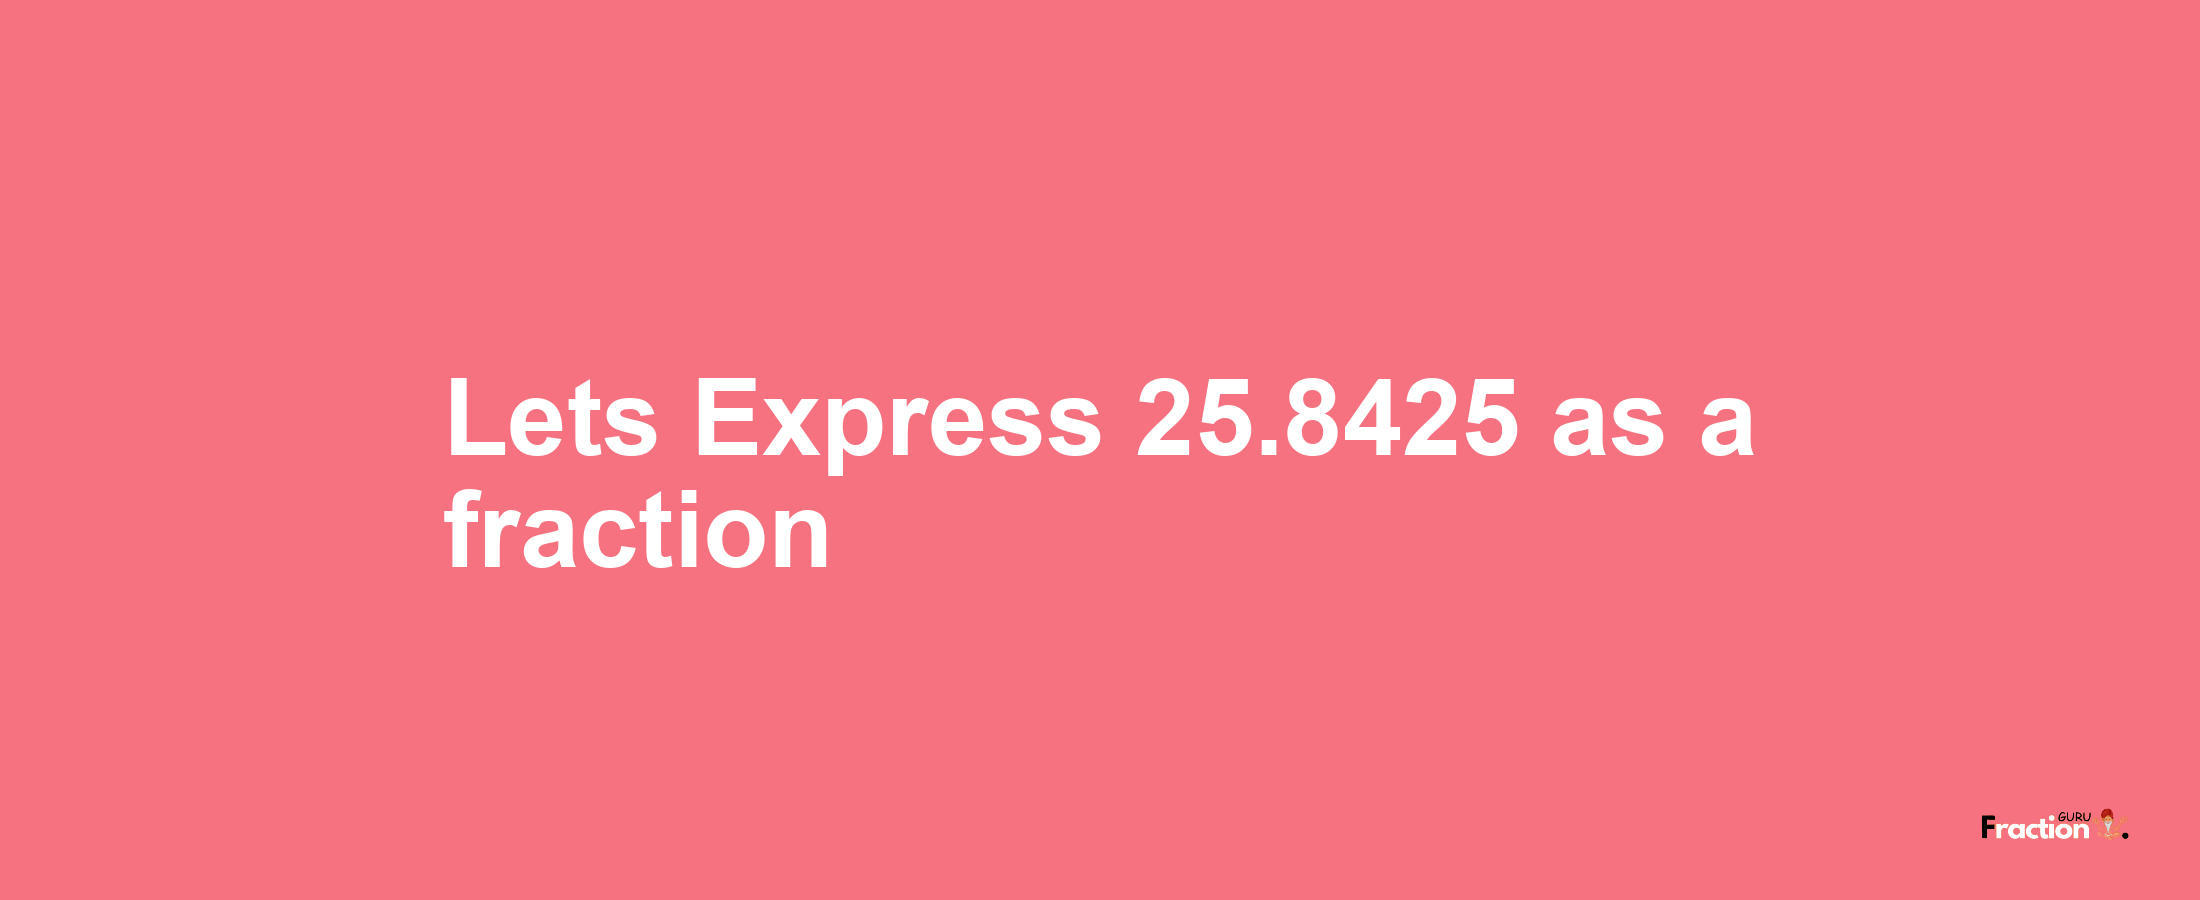 Lets Express 25.8425 as afraction